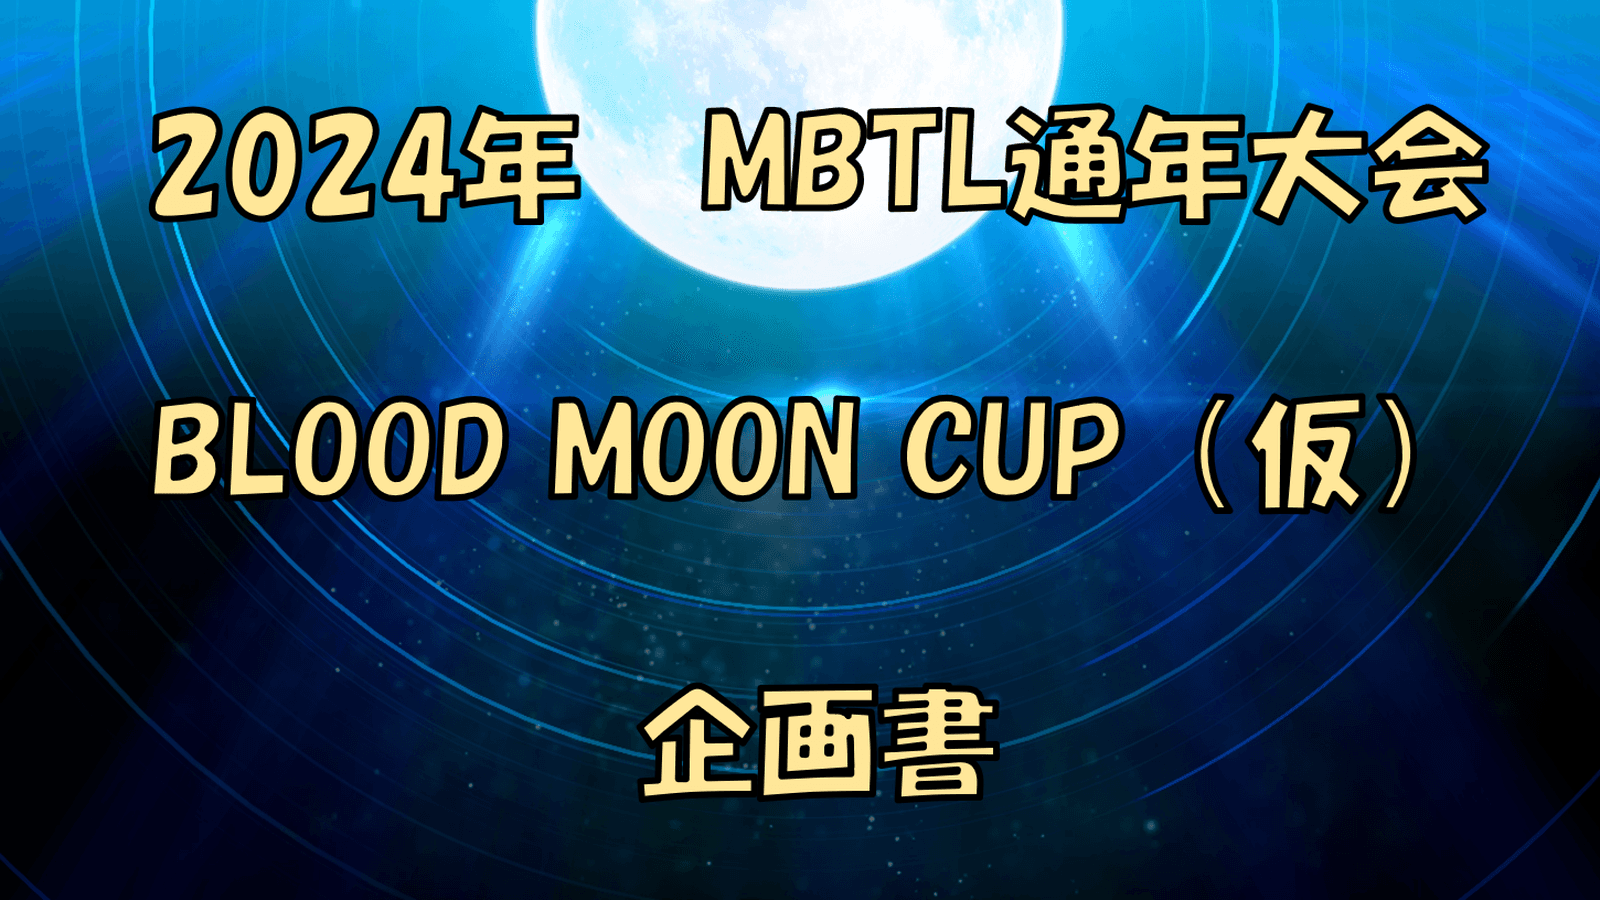 BLOOD MOON CUP feature image